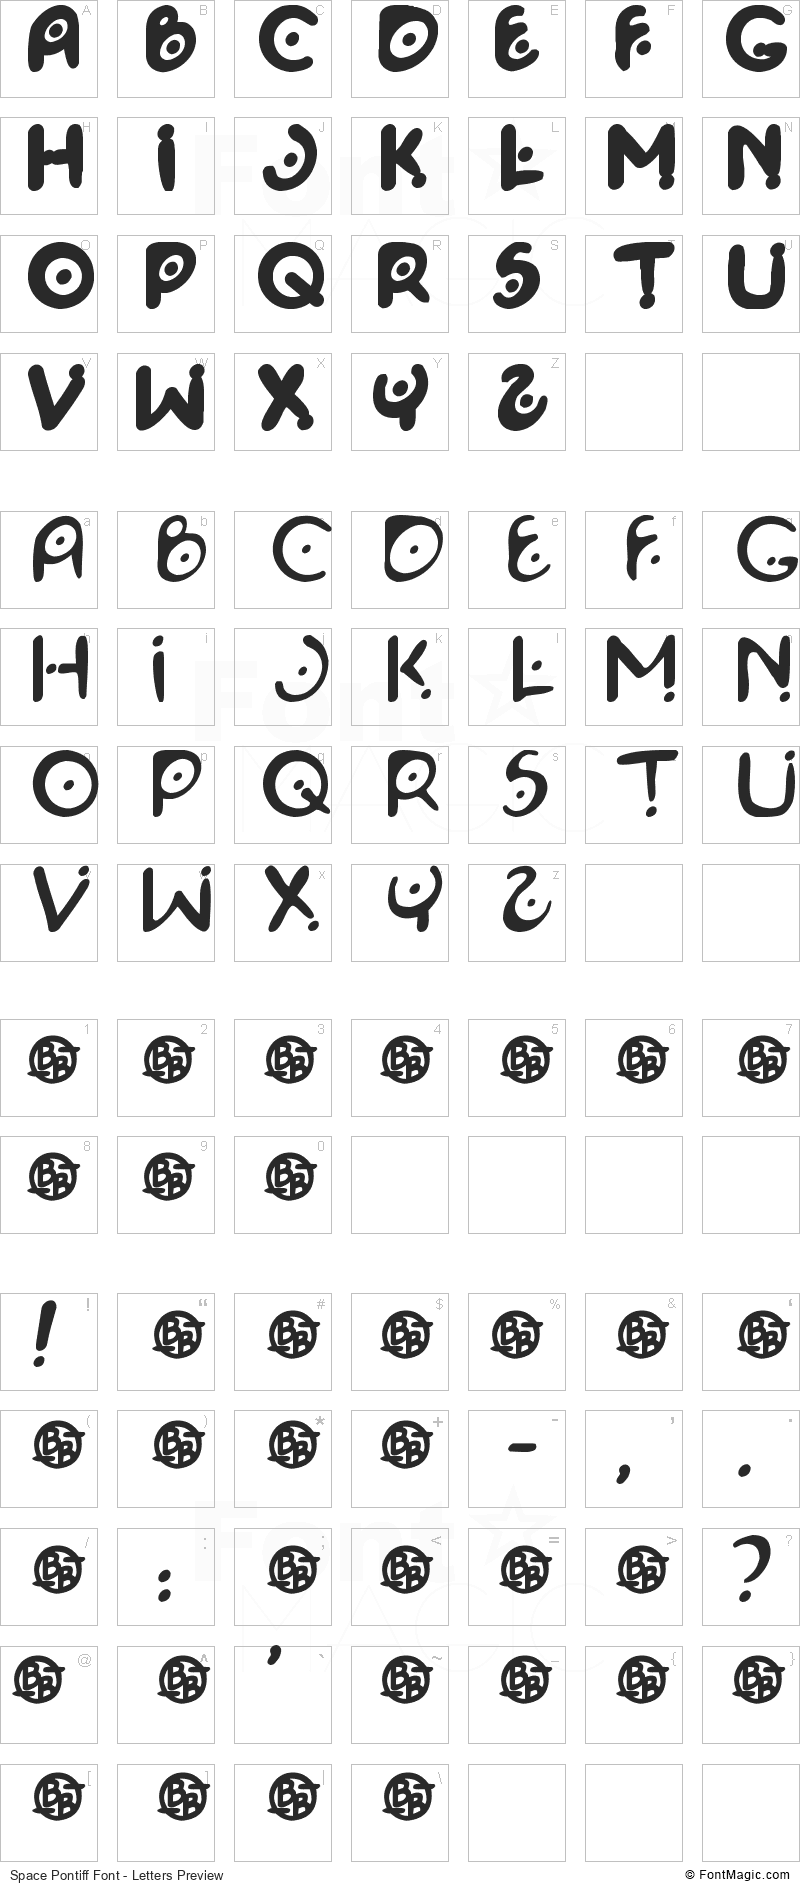 Space Pontiff Font - All Latters Preview Chart